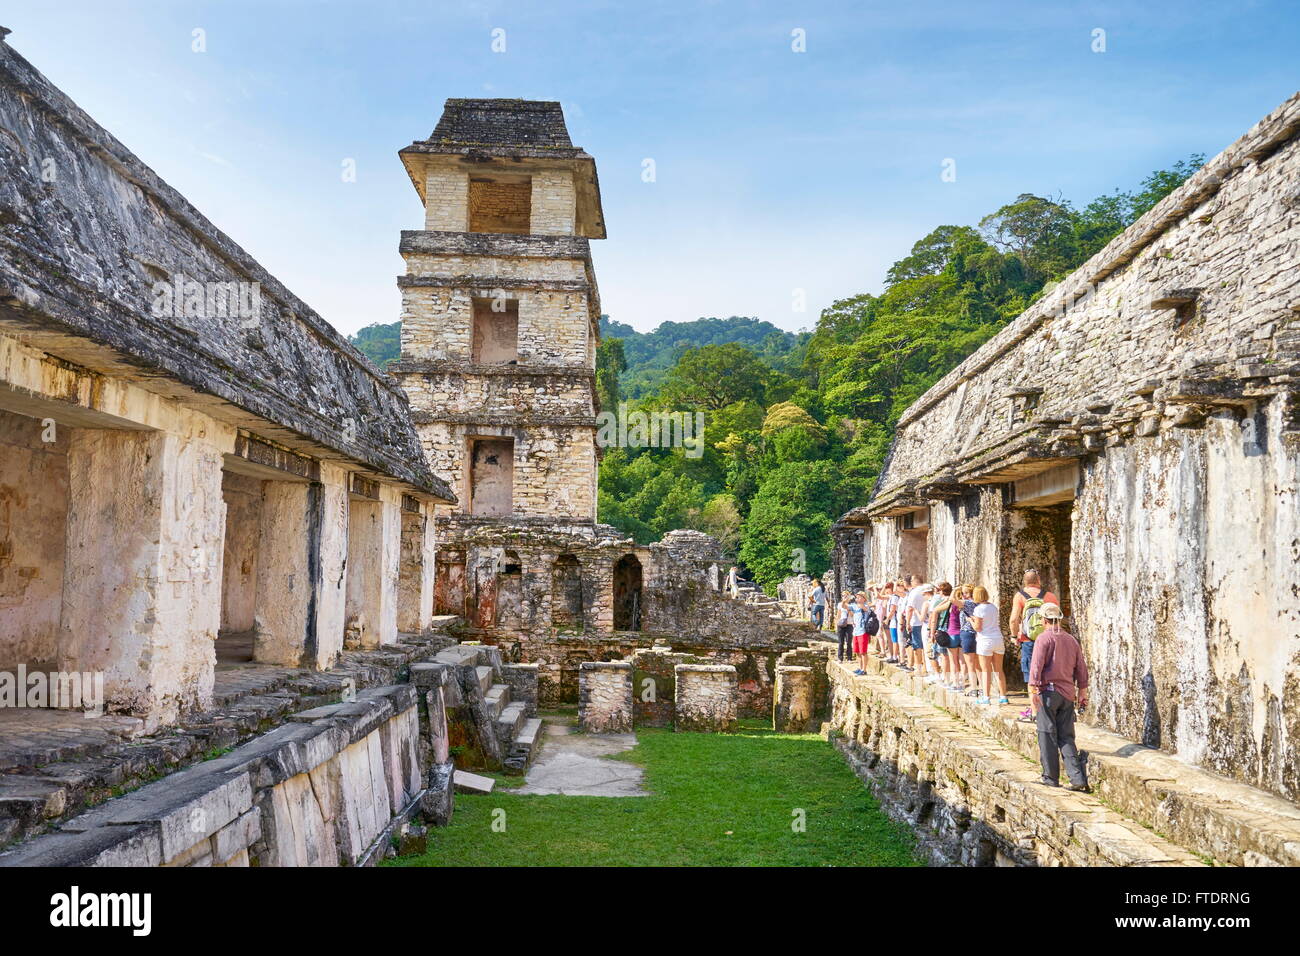 Ruin of Maya Palace, Palenque Archaeological Site, Palenque, Chiapas, Mexico Stock Photo